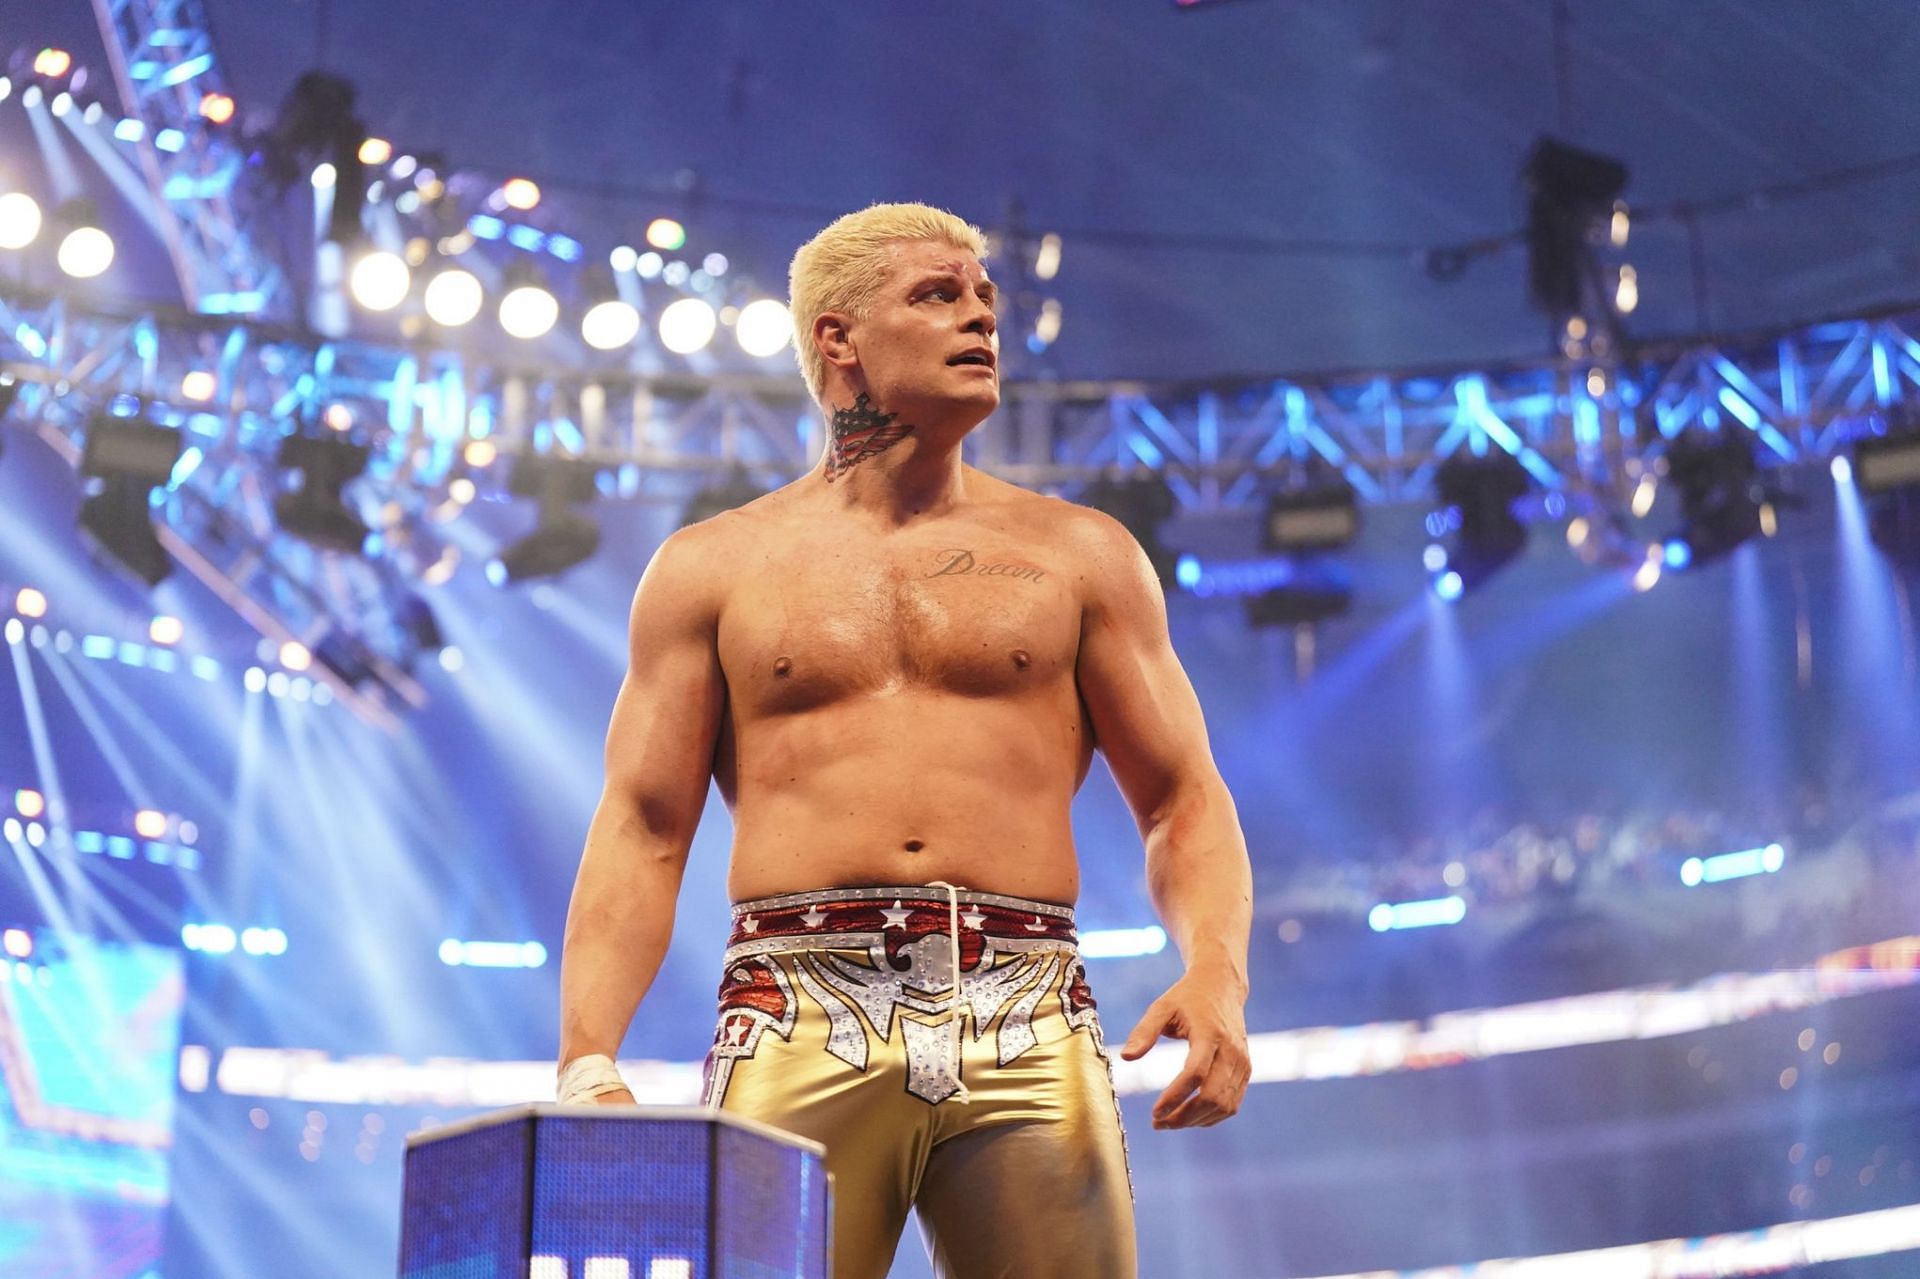 Cody Rhodes has made it his mission statement to win the one title that has eluded the Rhodes family.